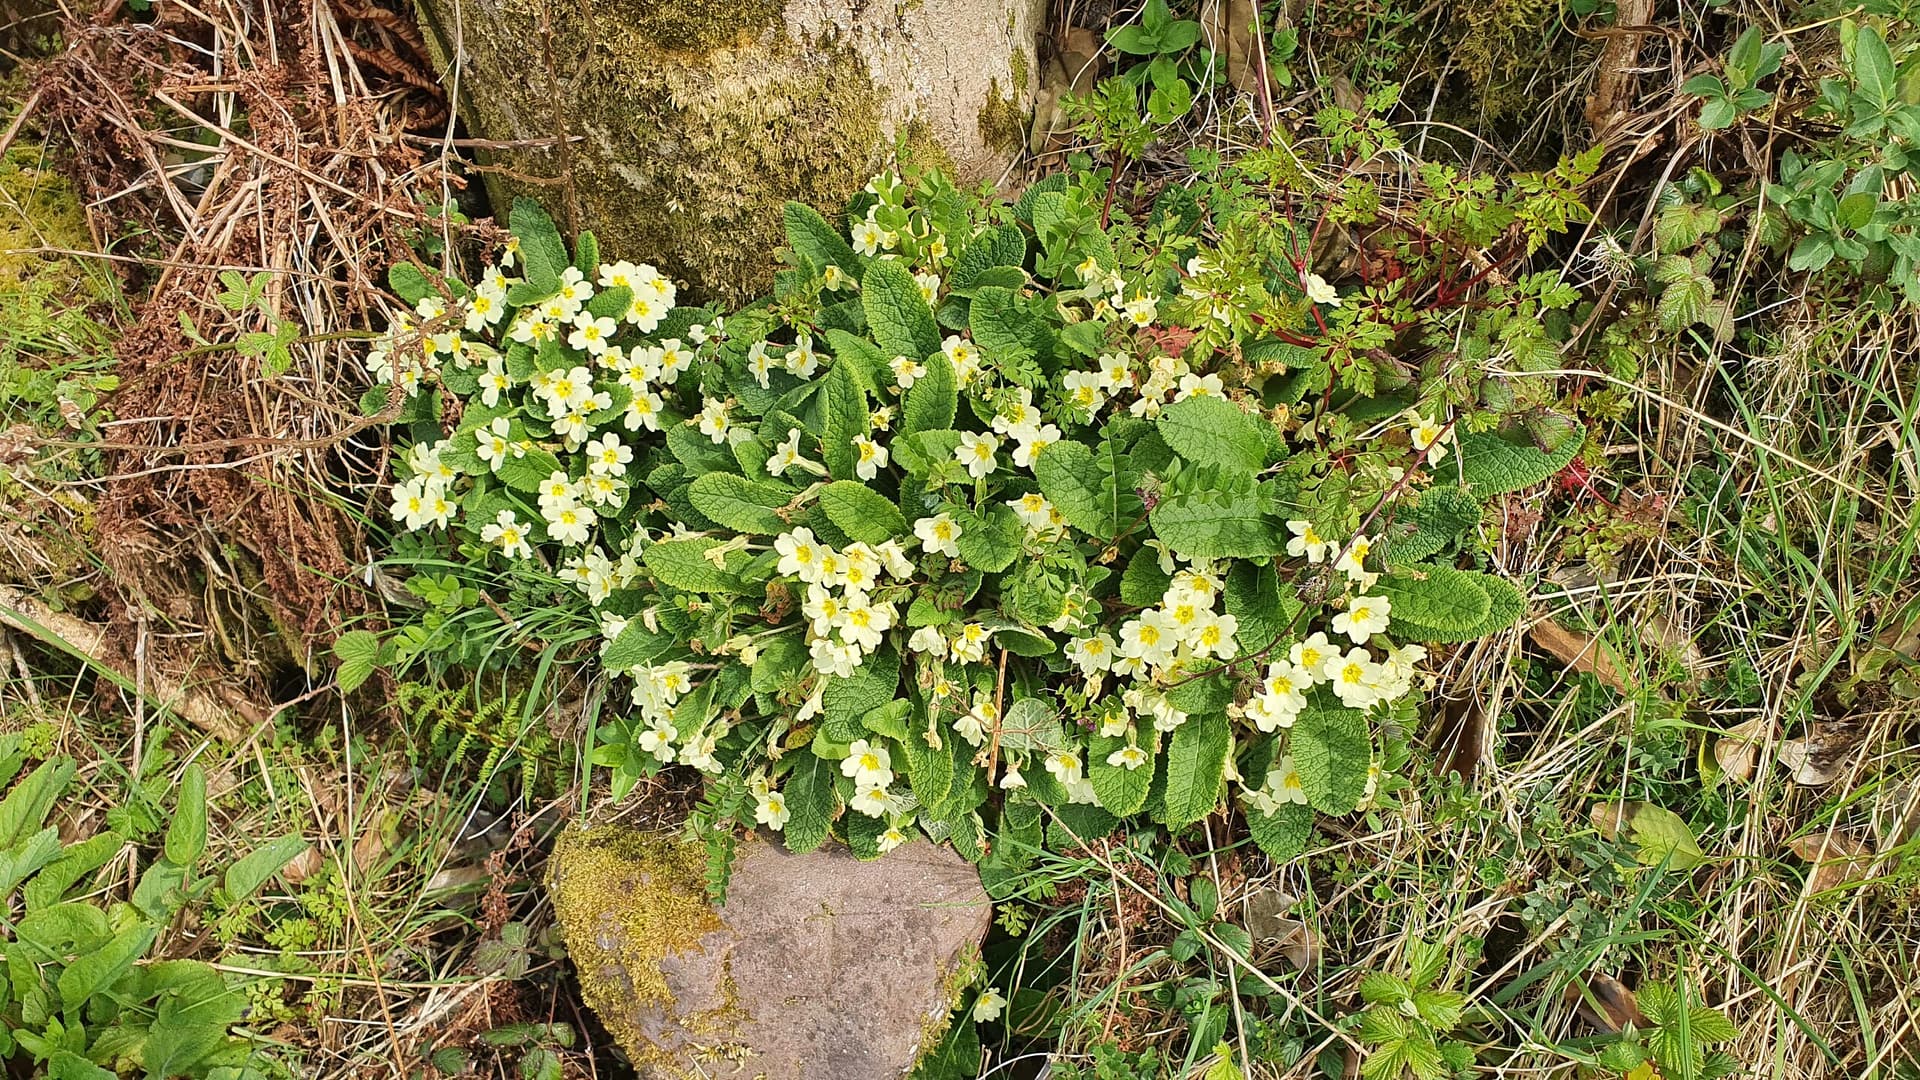 Wild primroses along the side of the road